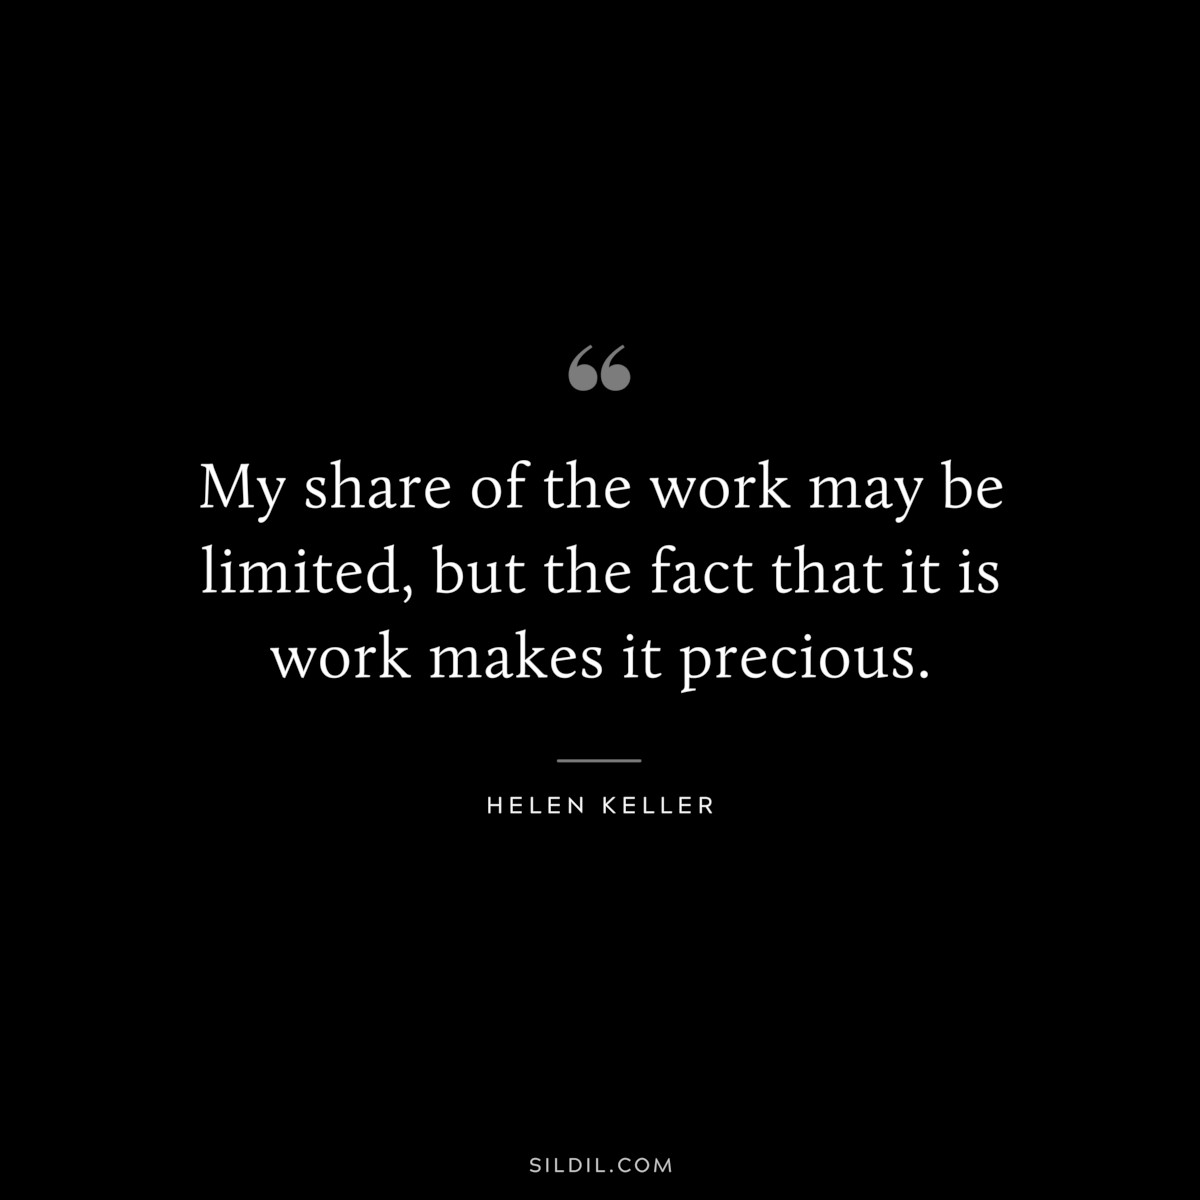 My share of the work may be limited, but the fact that it is work makes it precious. ― Helen Keller